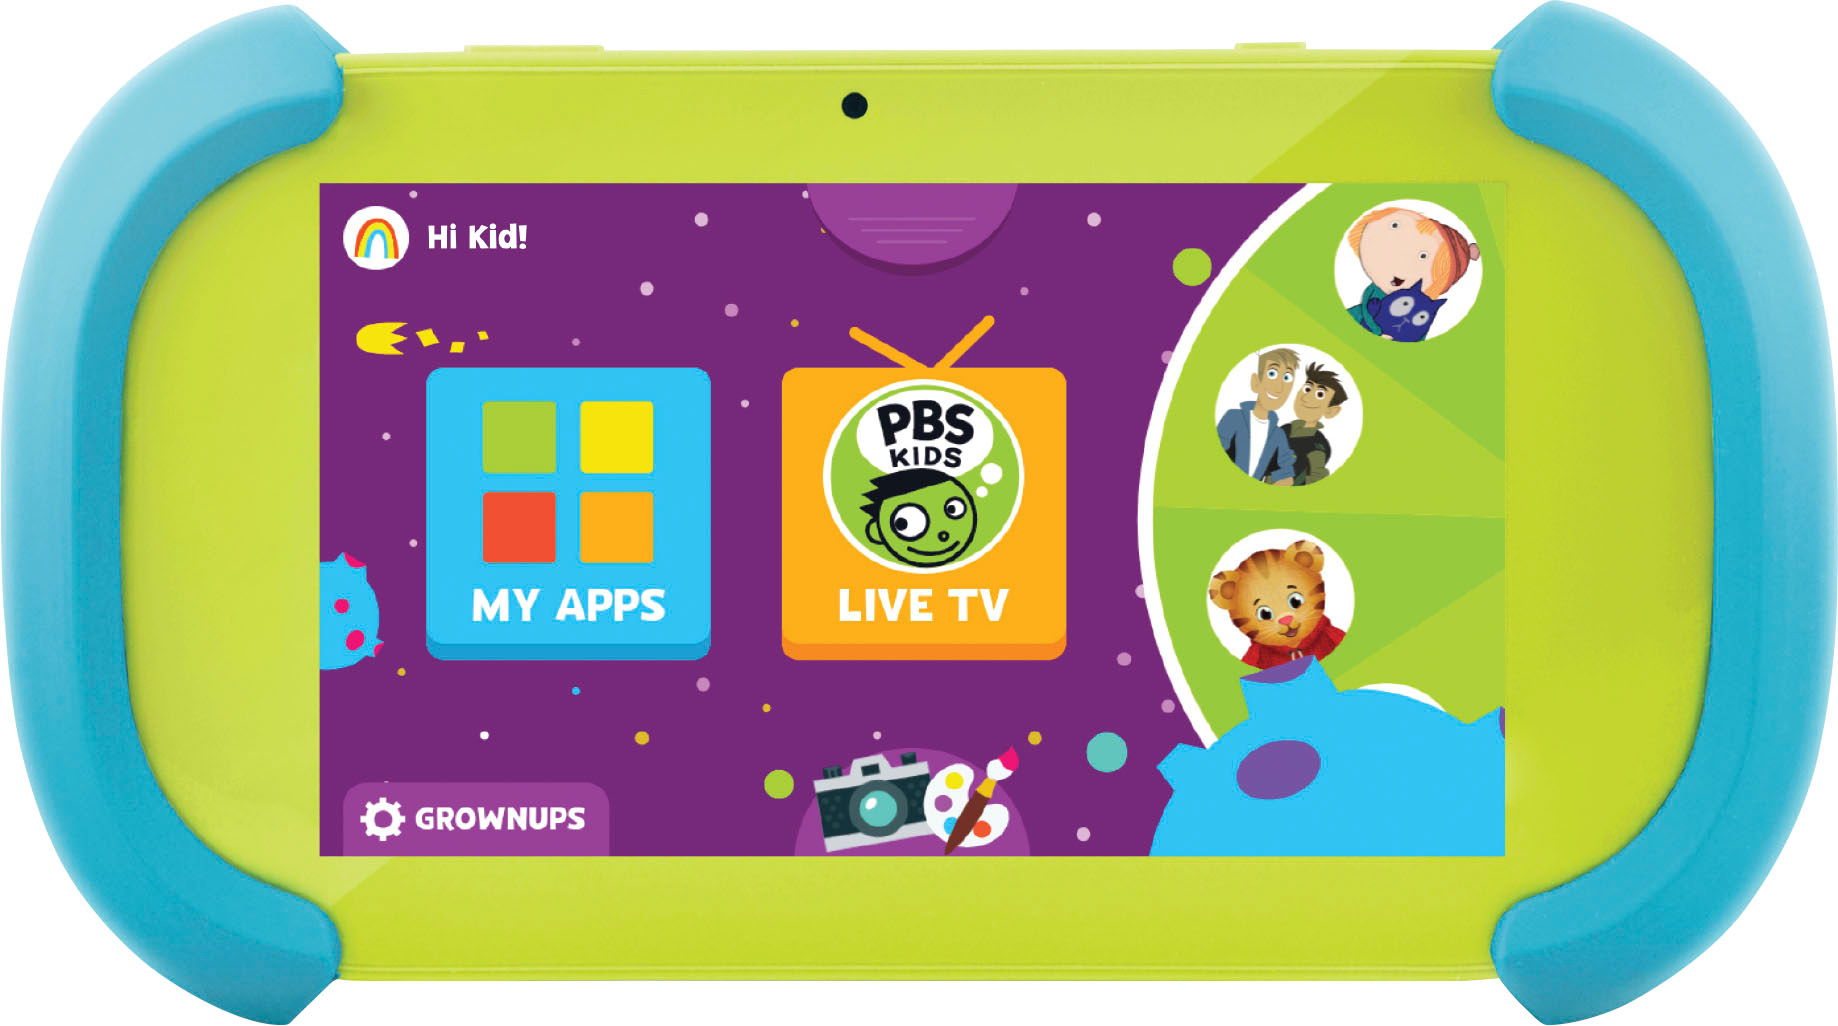 Give Your Kids Safe and Easy Access to Over 100 PC Games